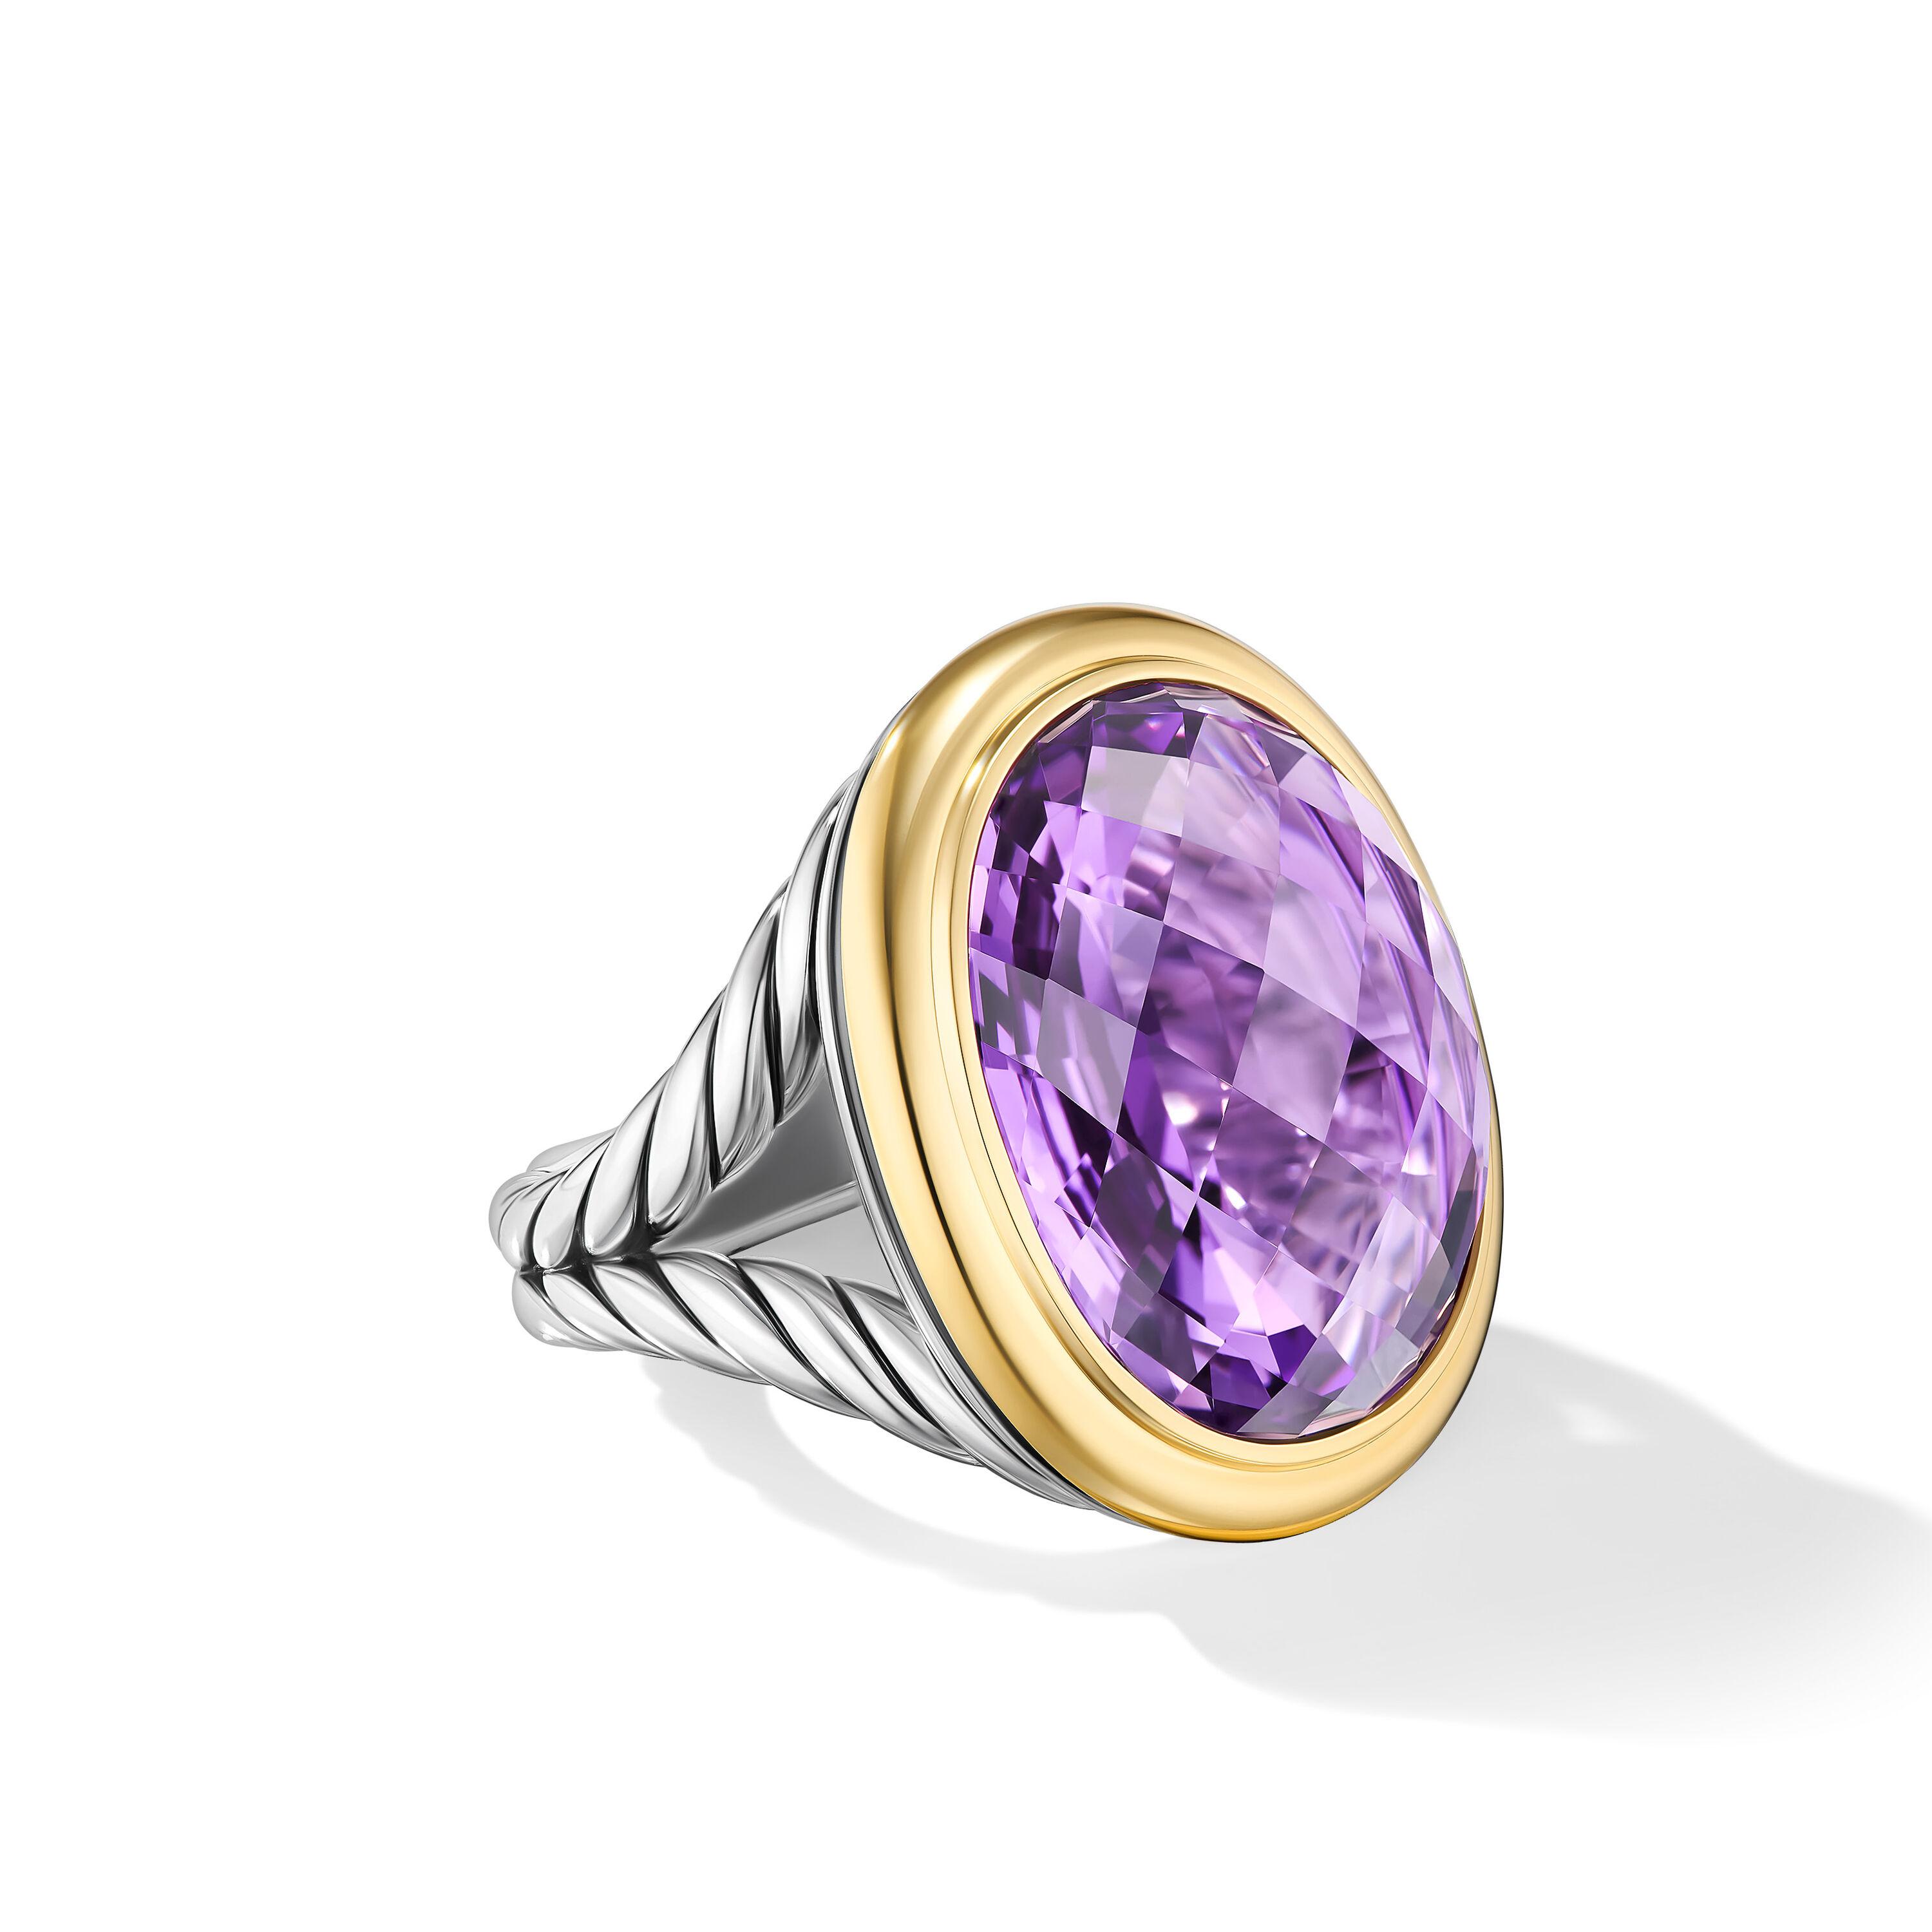 David Yurman Albion Oval Ring in Sterling Silver with 18K Yellow Gold and Amethyst